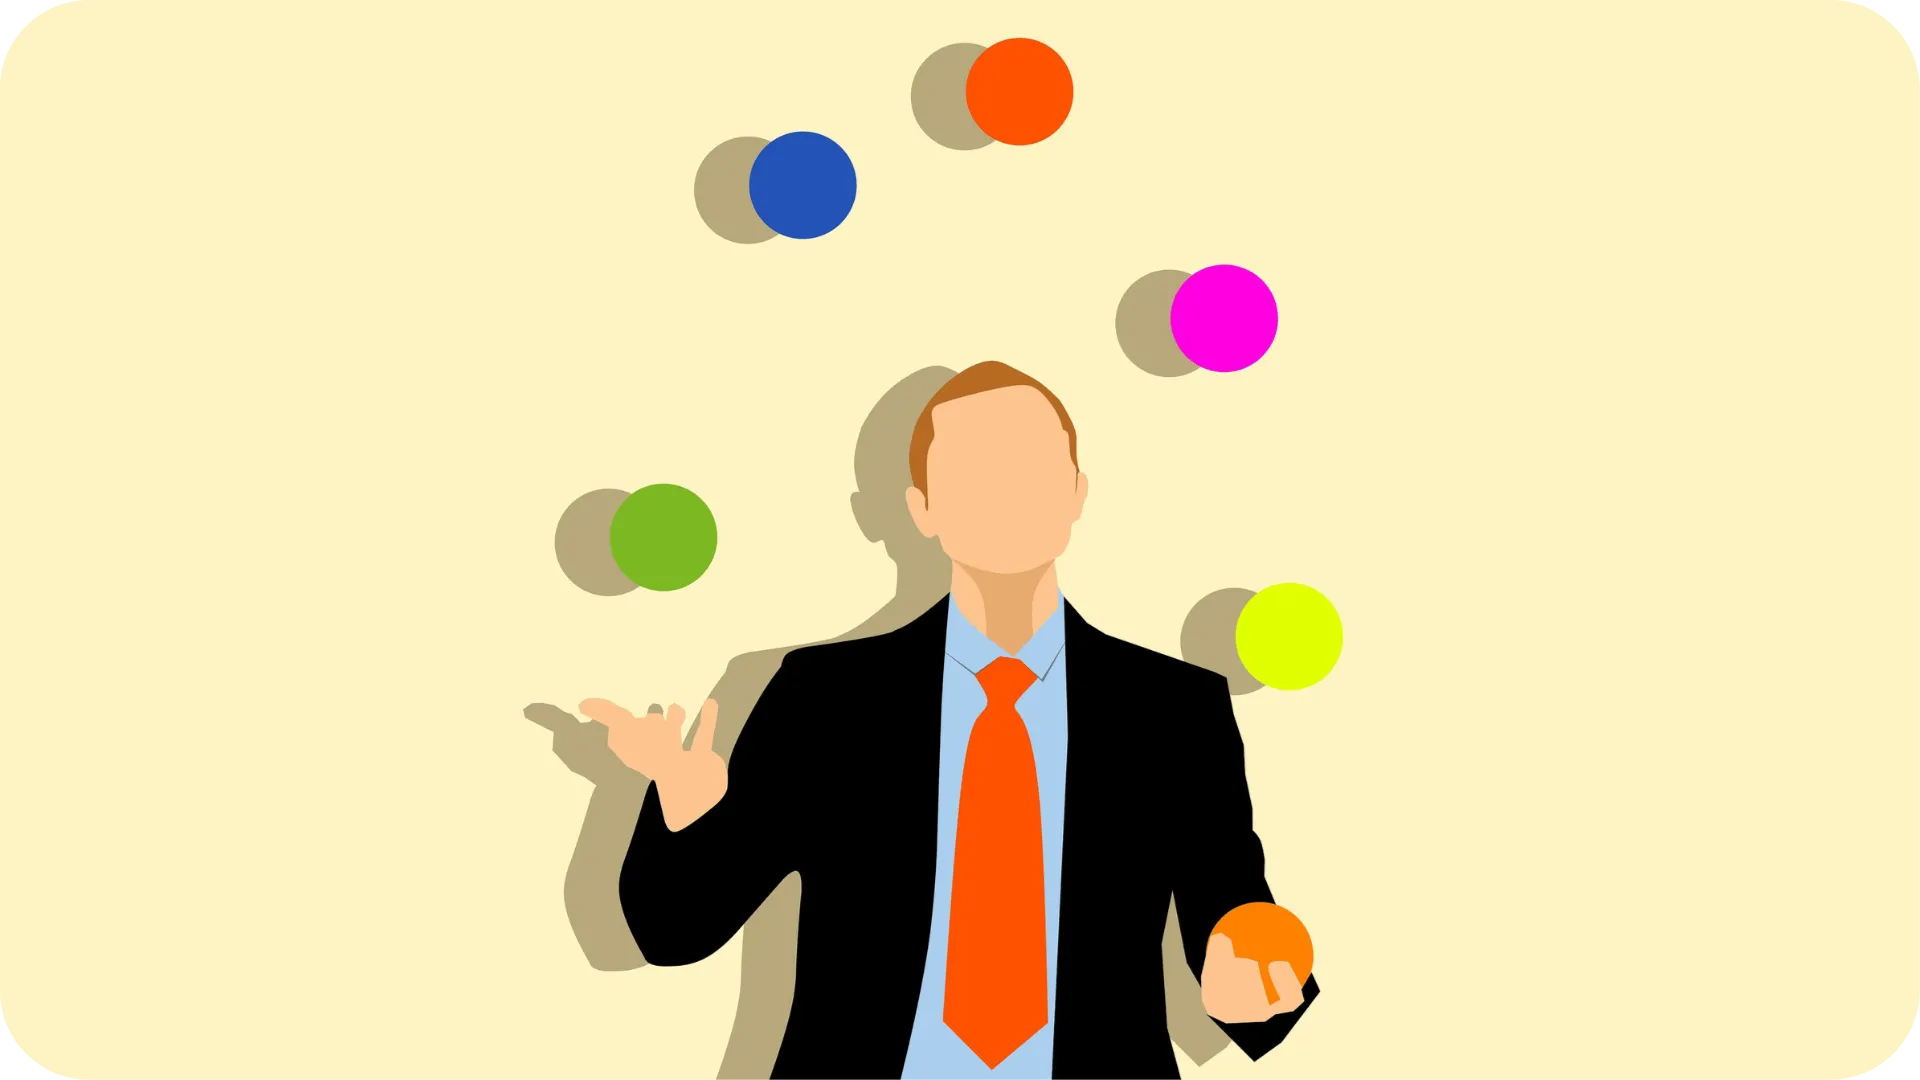 Business man in a suit juggling balls